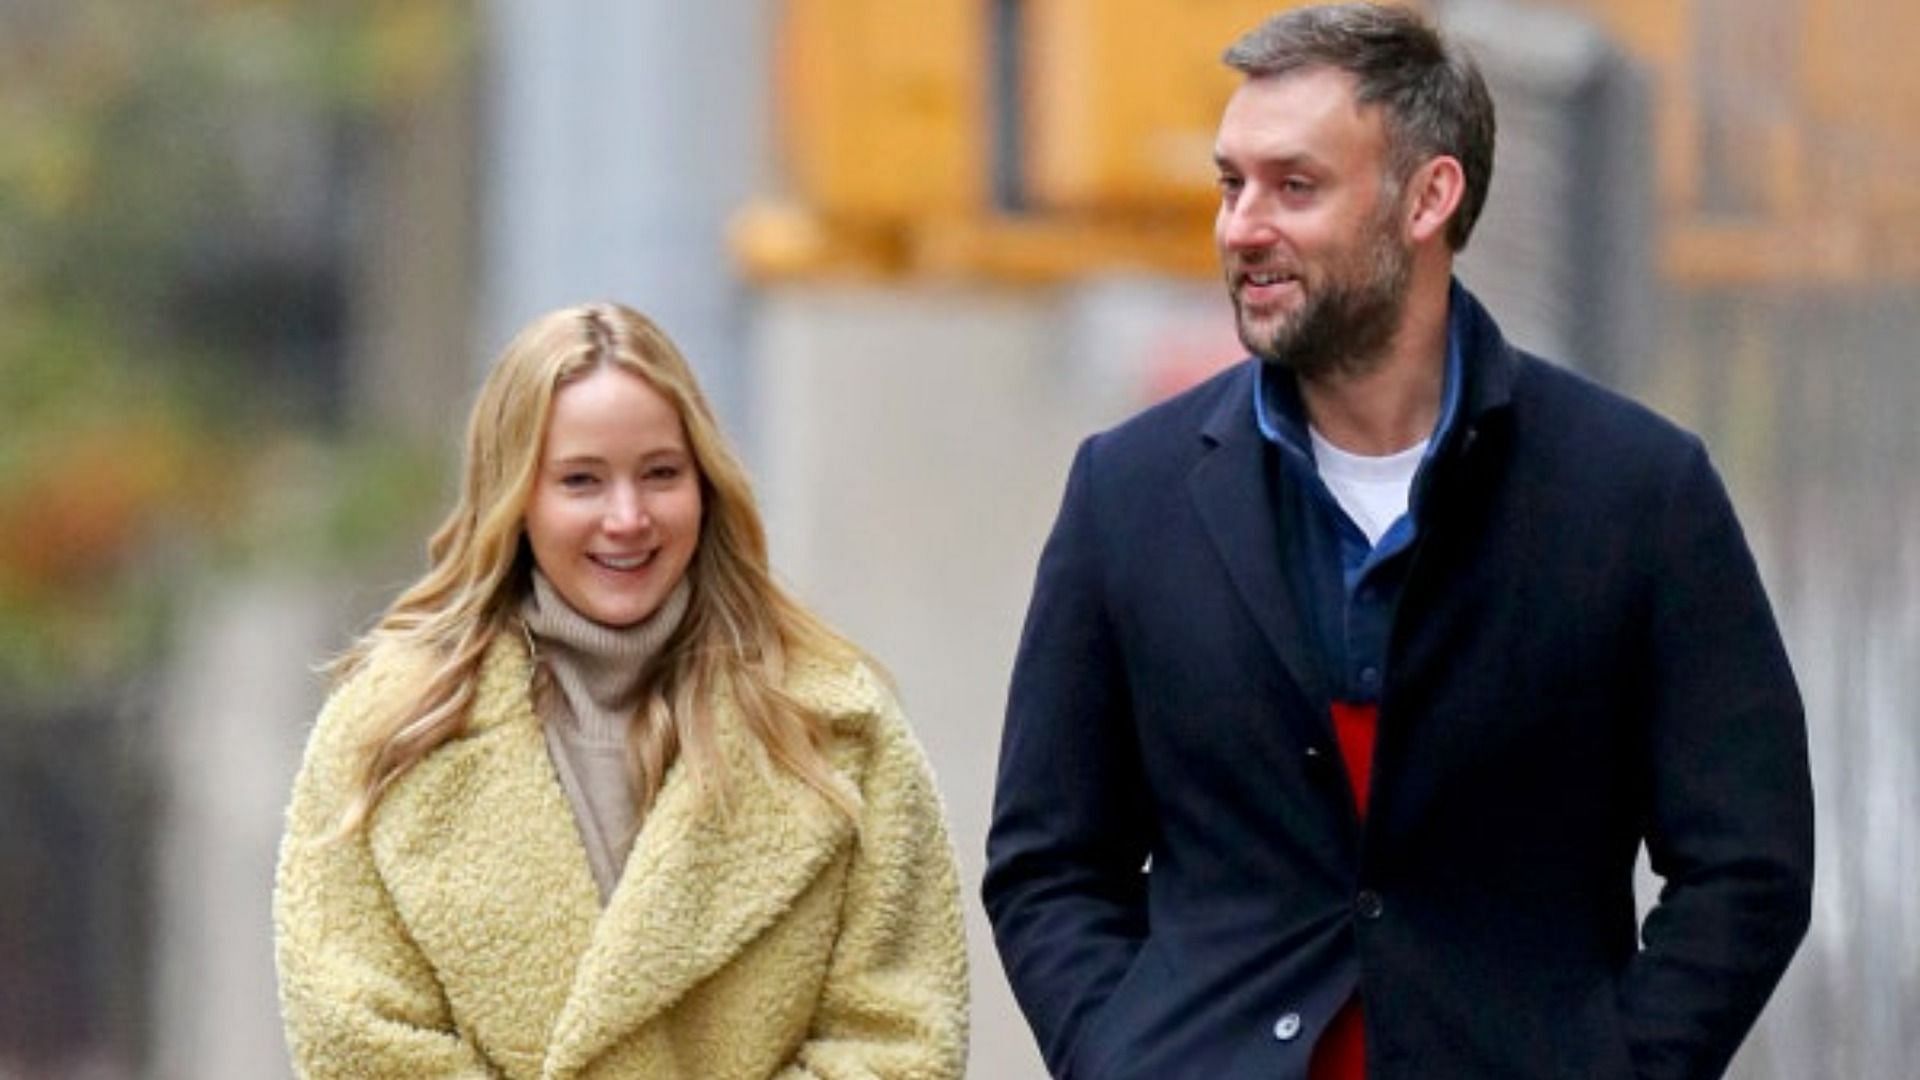 Jennifer Lawrence and Cooke Maroney tied the knot in October 2019, a year after knowing each other (Image via Twitter/ @pinongatp)